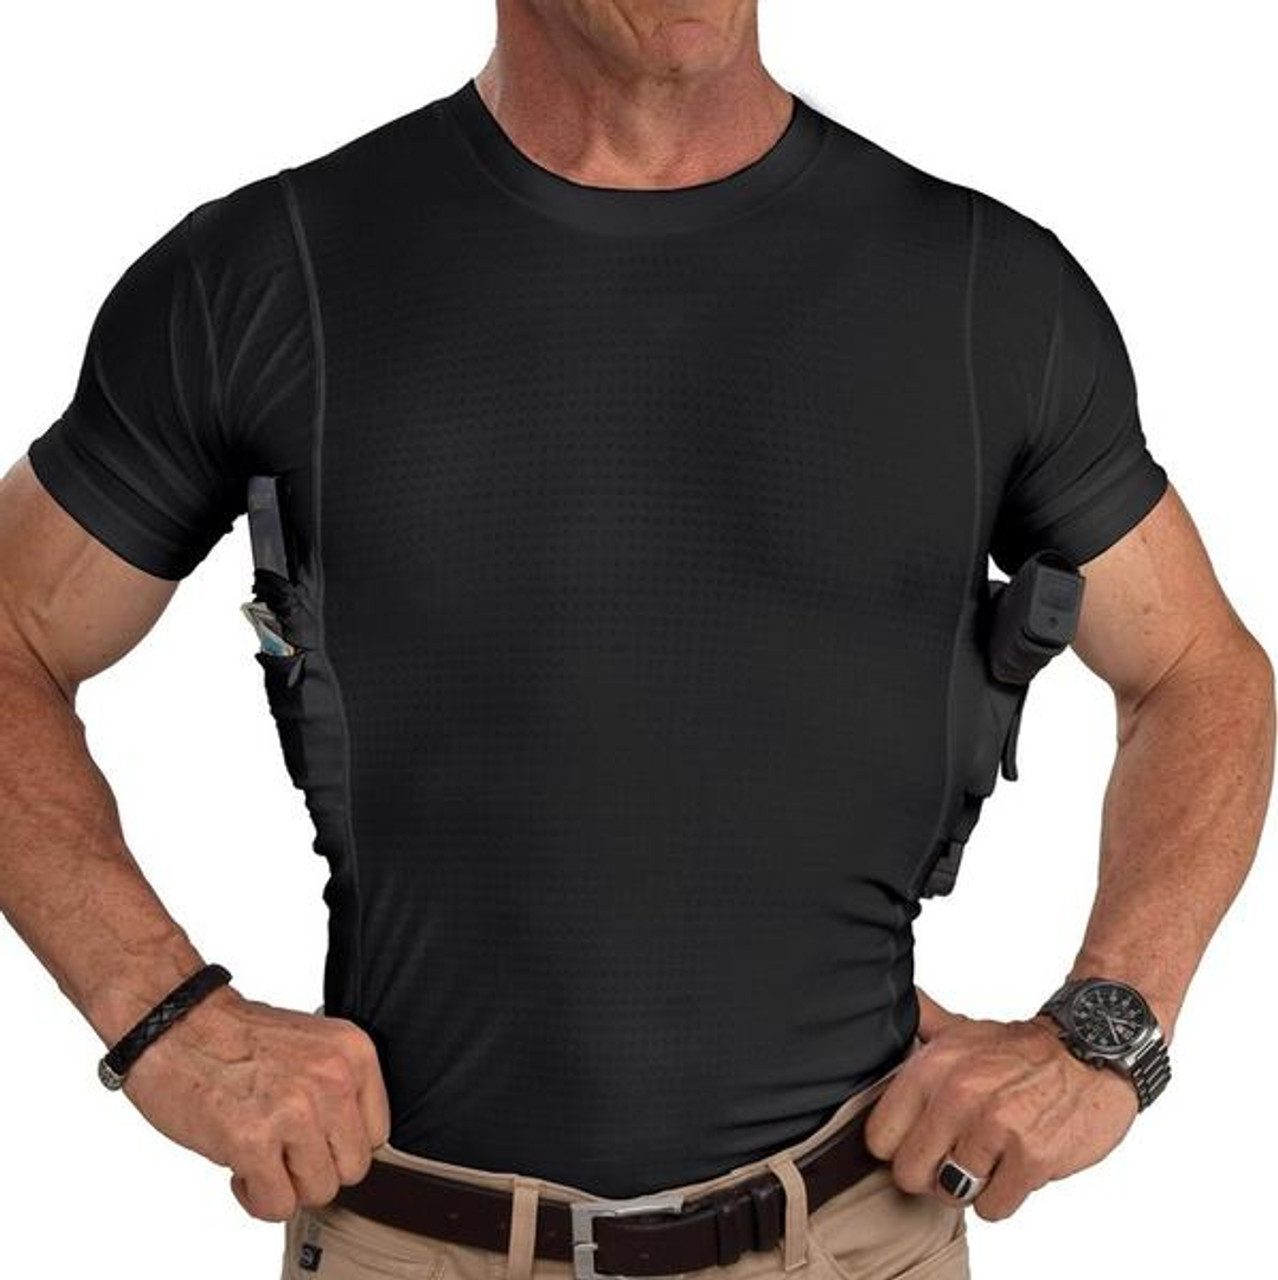 Holster Concealed Carry Executive Crew Neck Shirt. Undertech secure